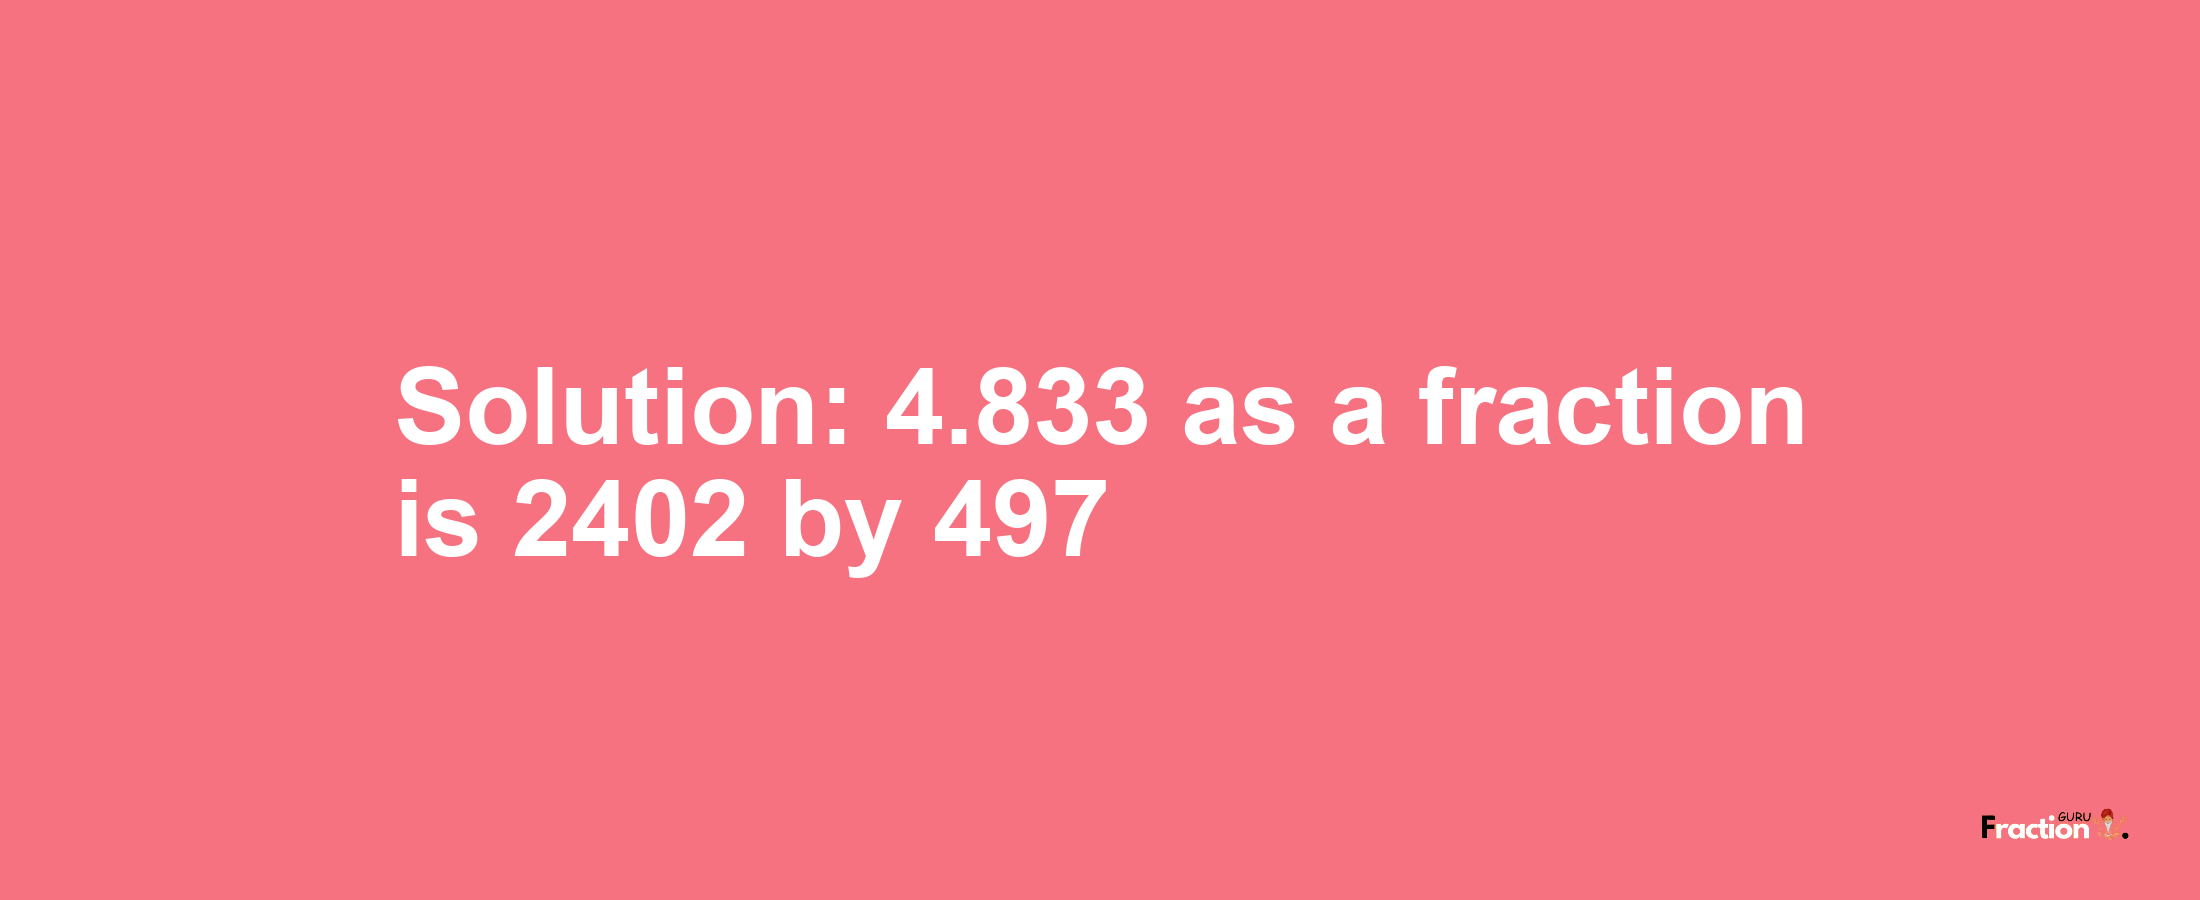 Solution:4.833 as a fraction is 2402/497